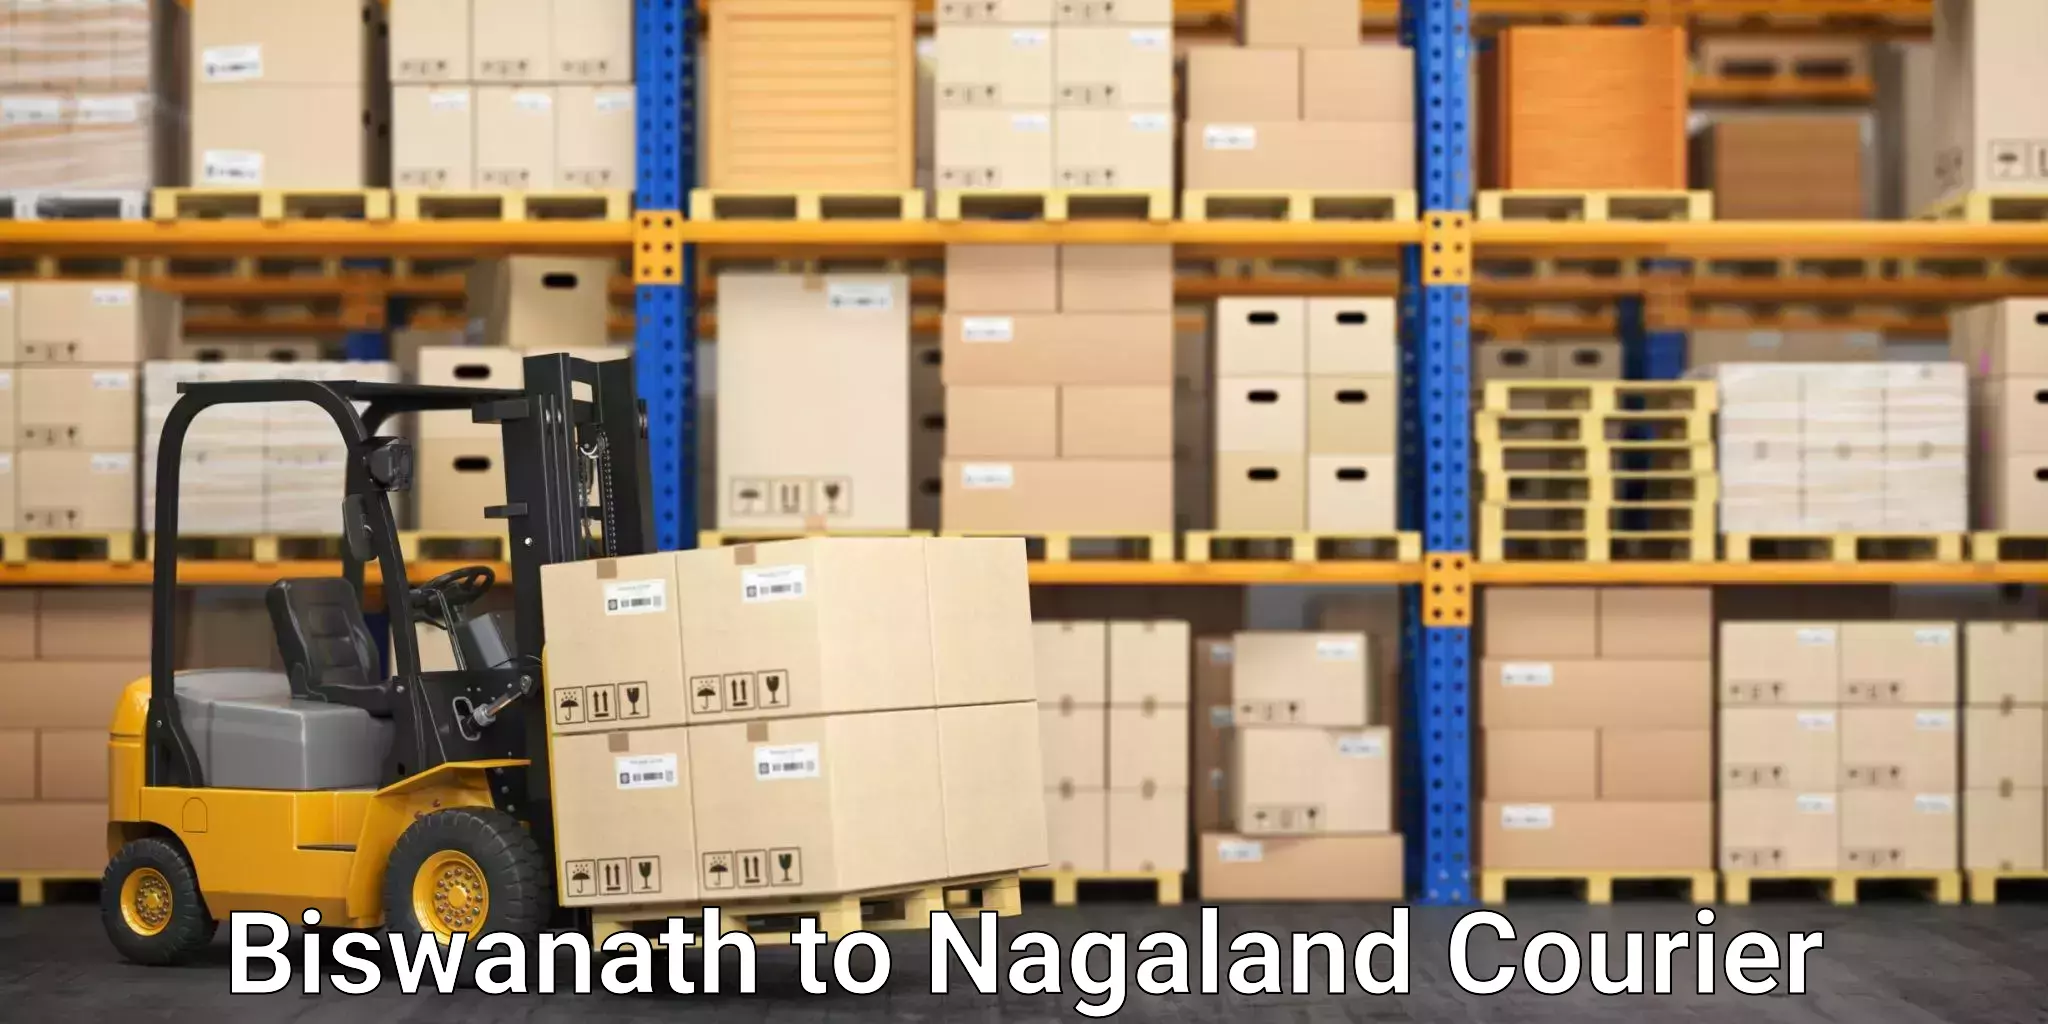 Reliable package handling Biswanath to Nagaland